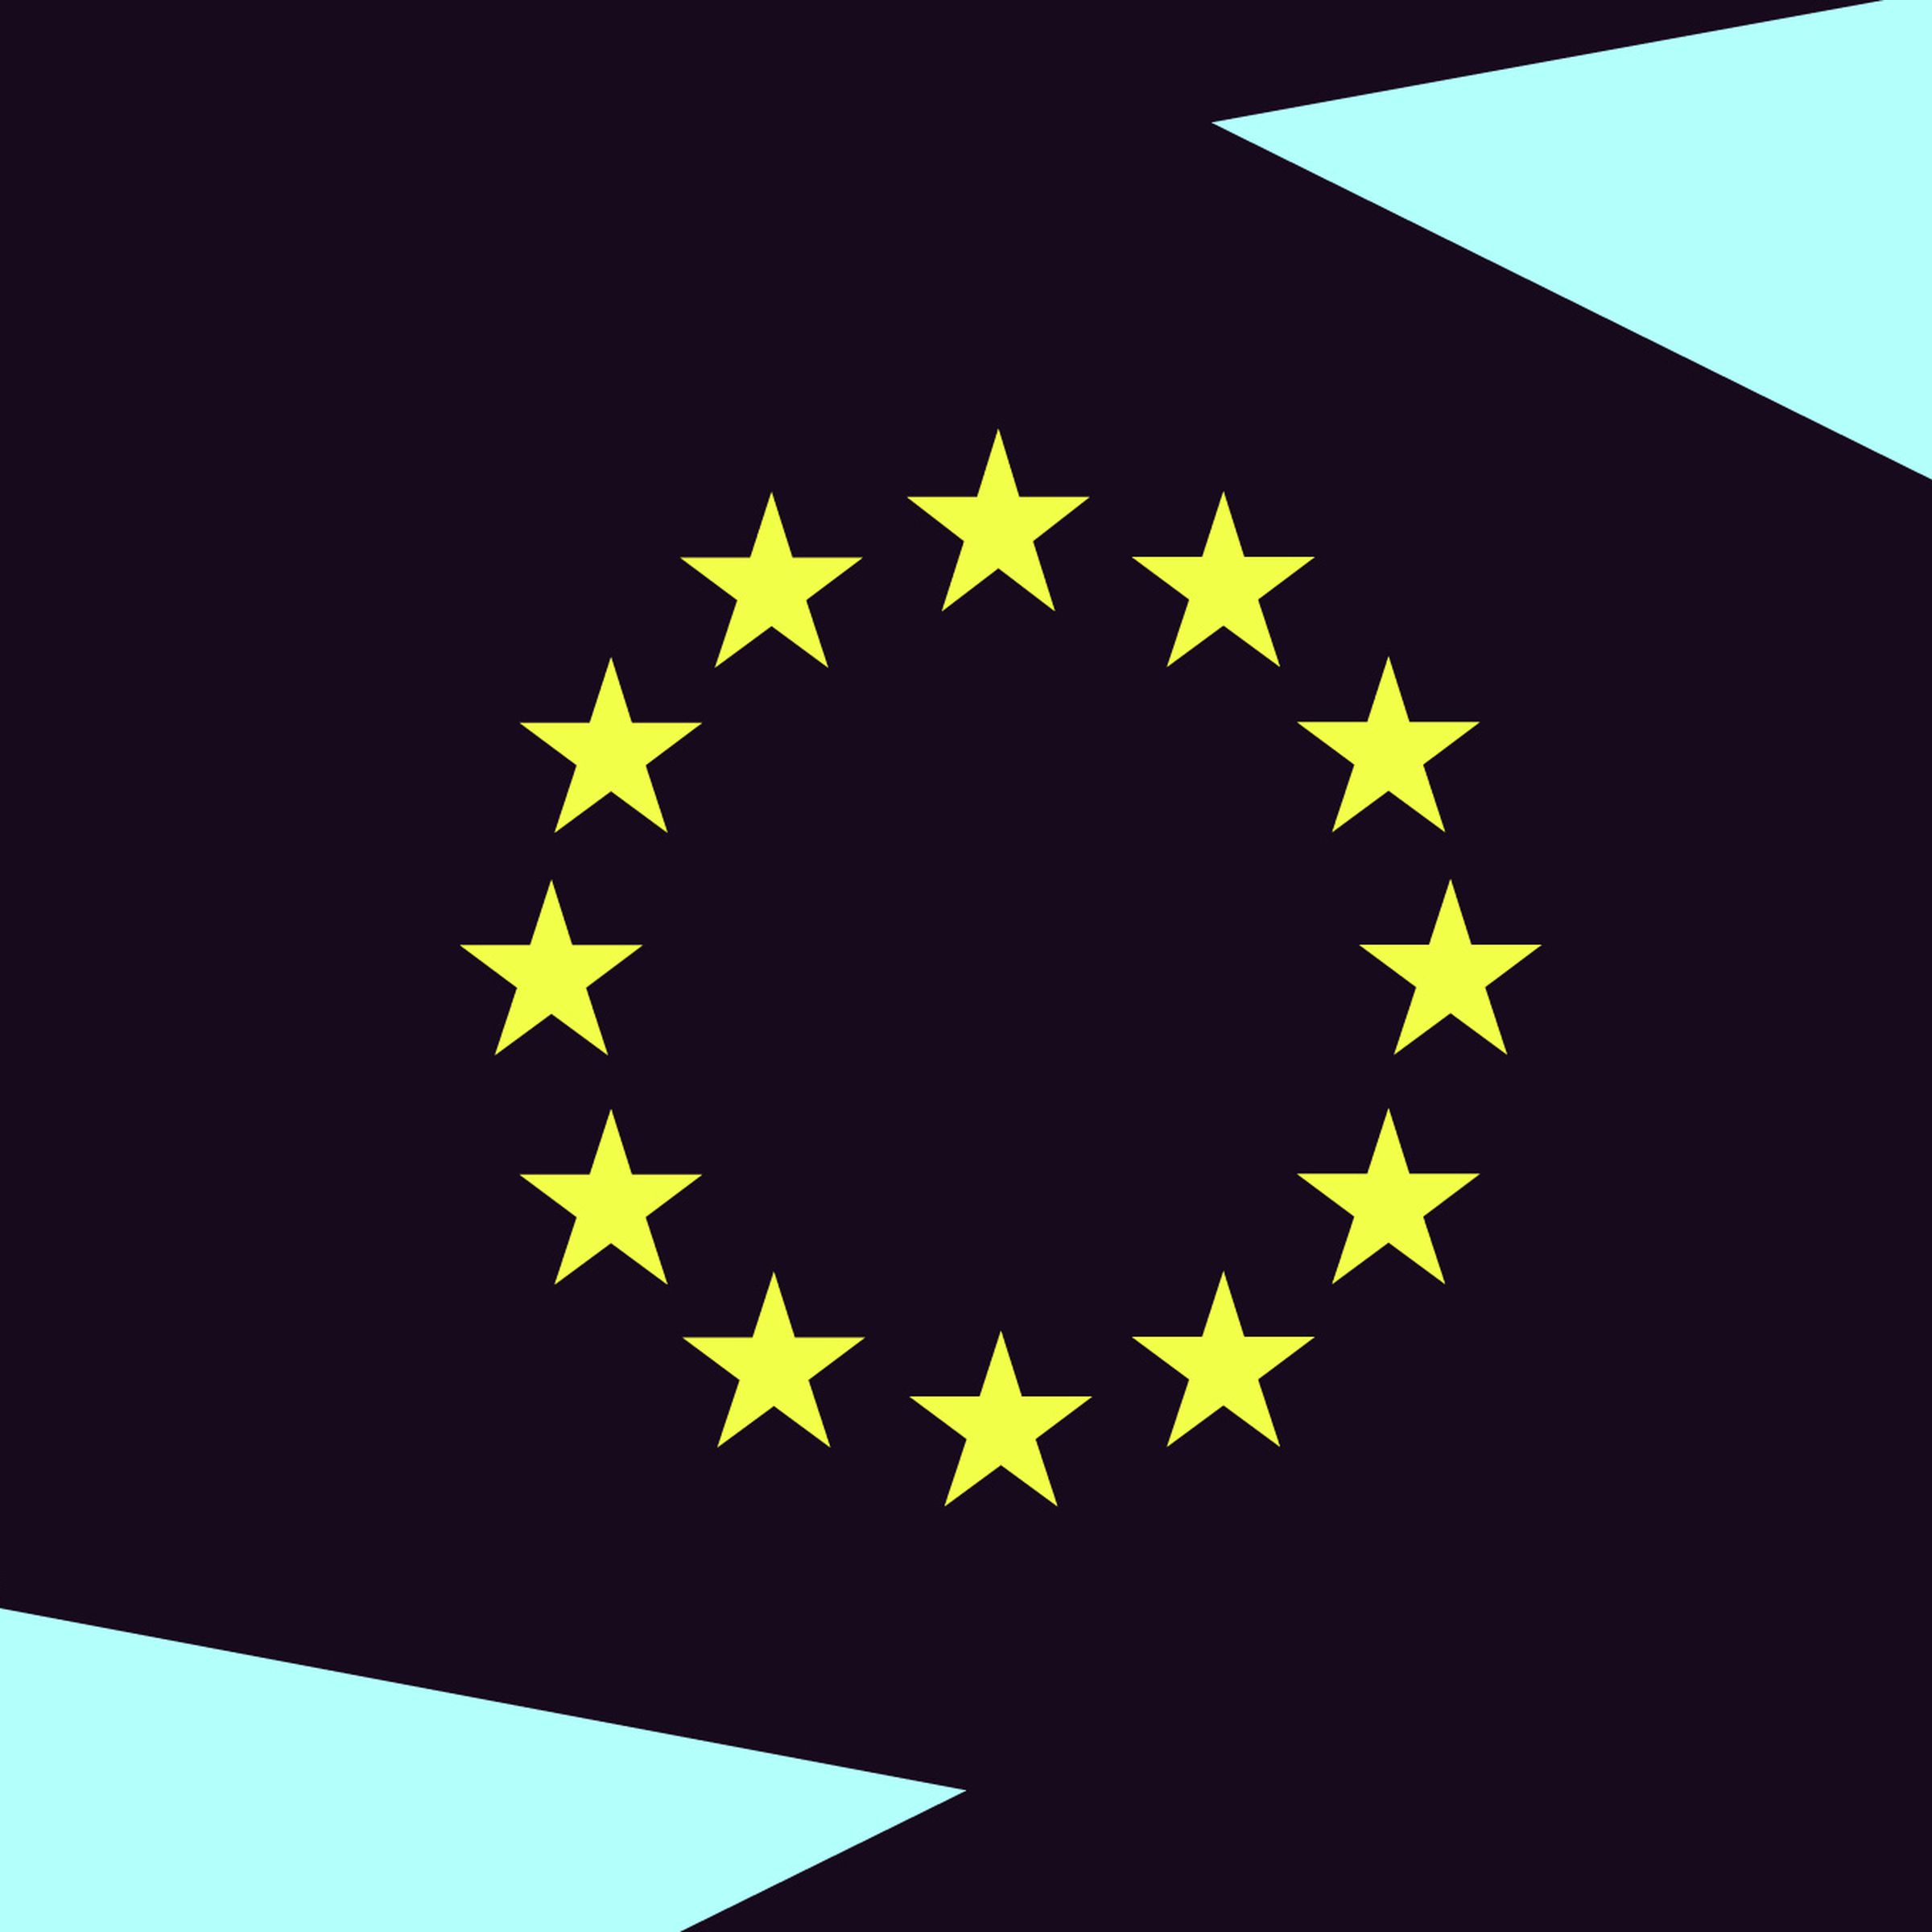 The image shows the stars from the European Union’s flag over a black background framed with blue.